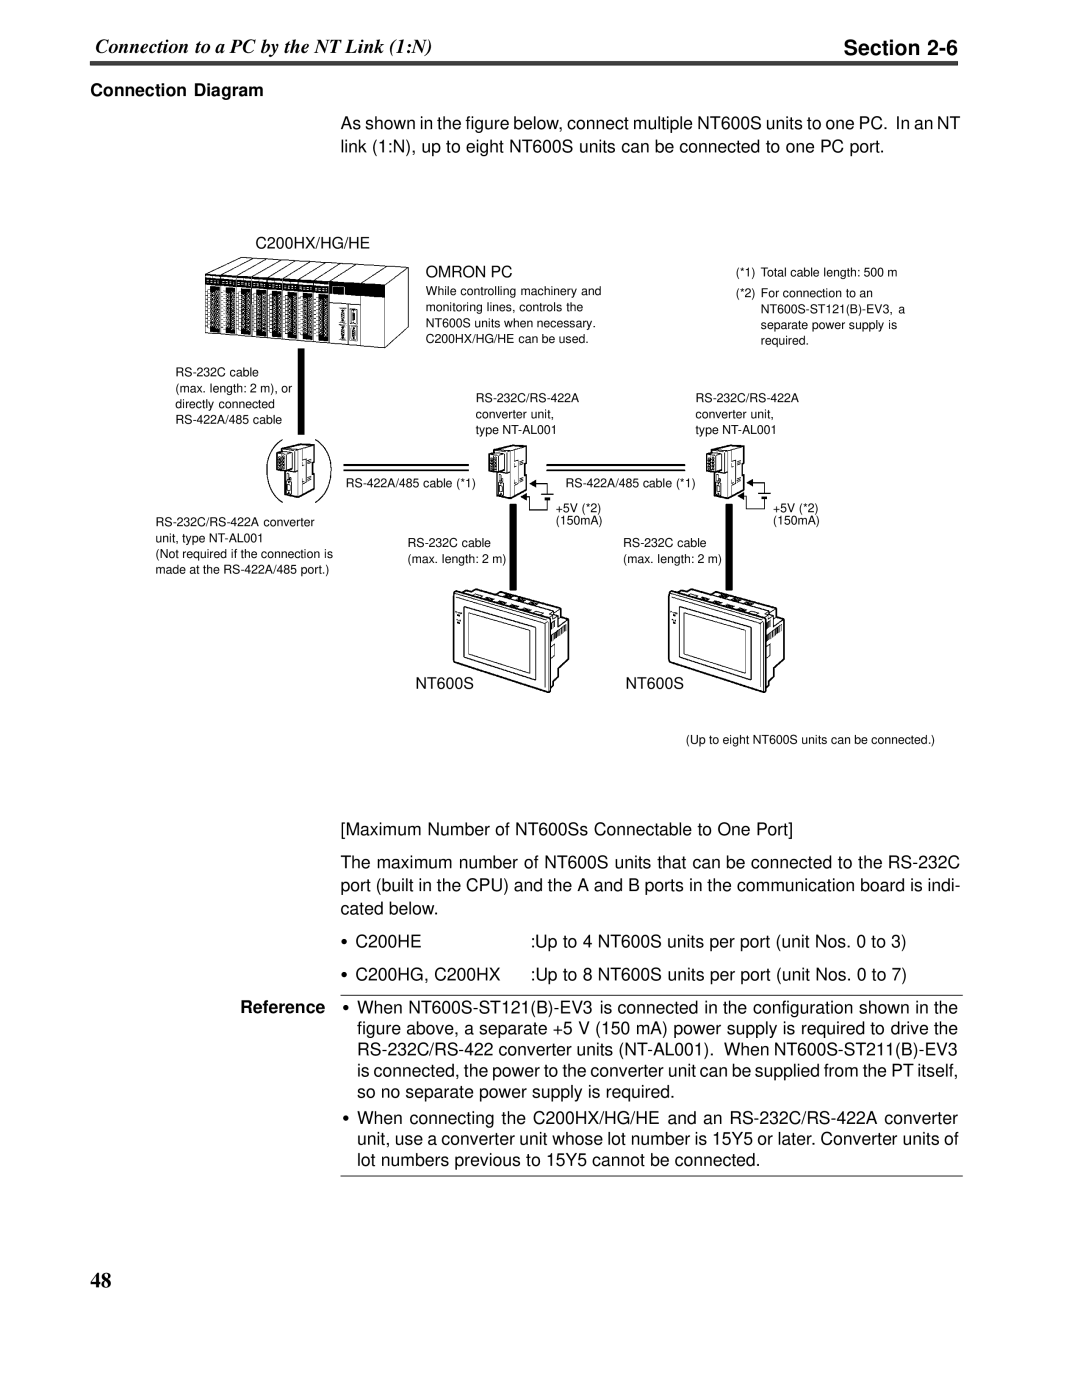 Omron V022-E3-1 operation manual Section, Connection Diagram 